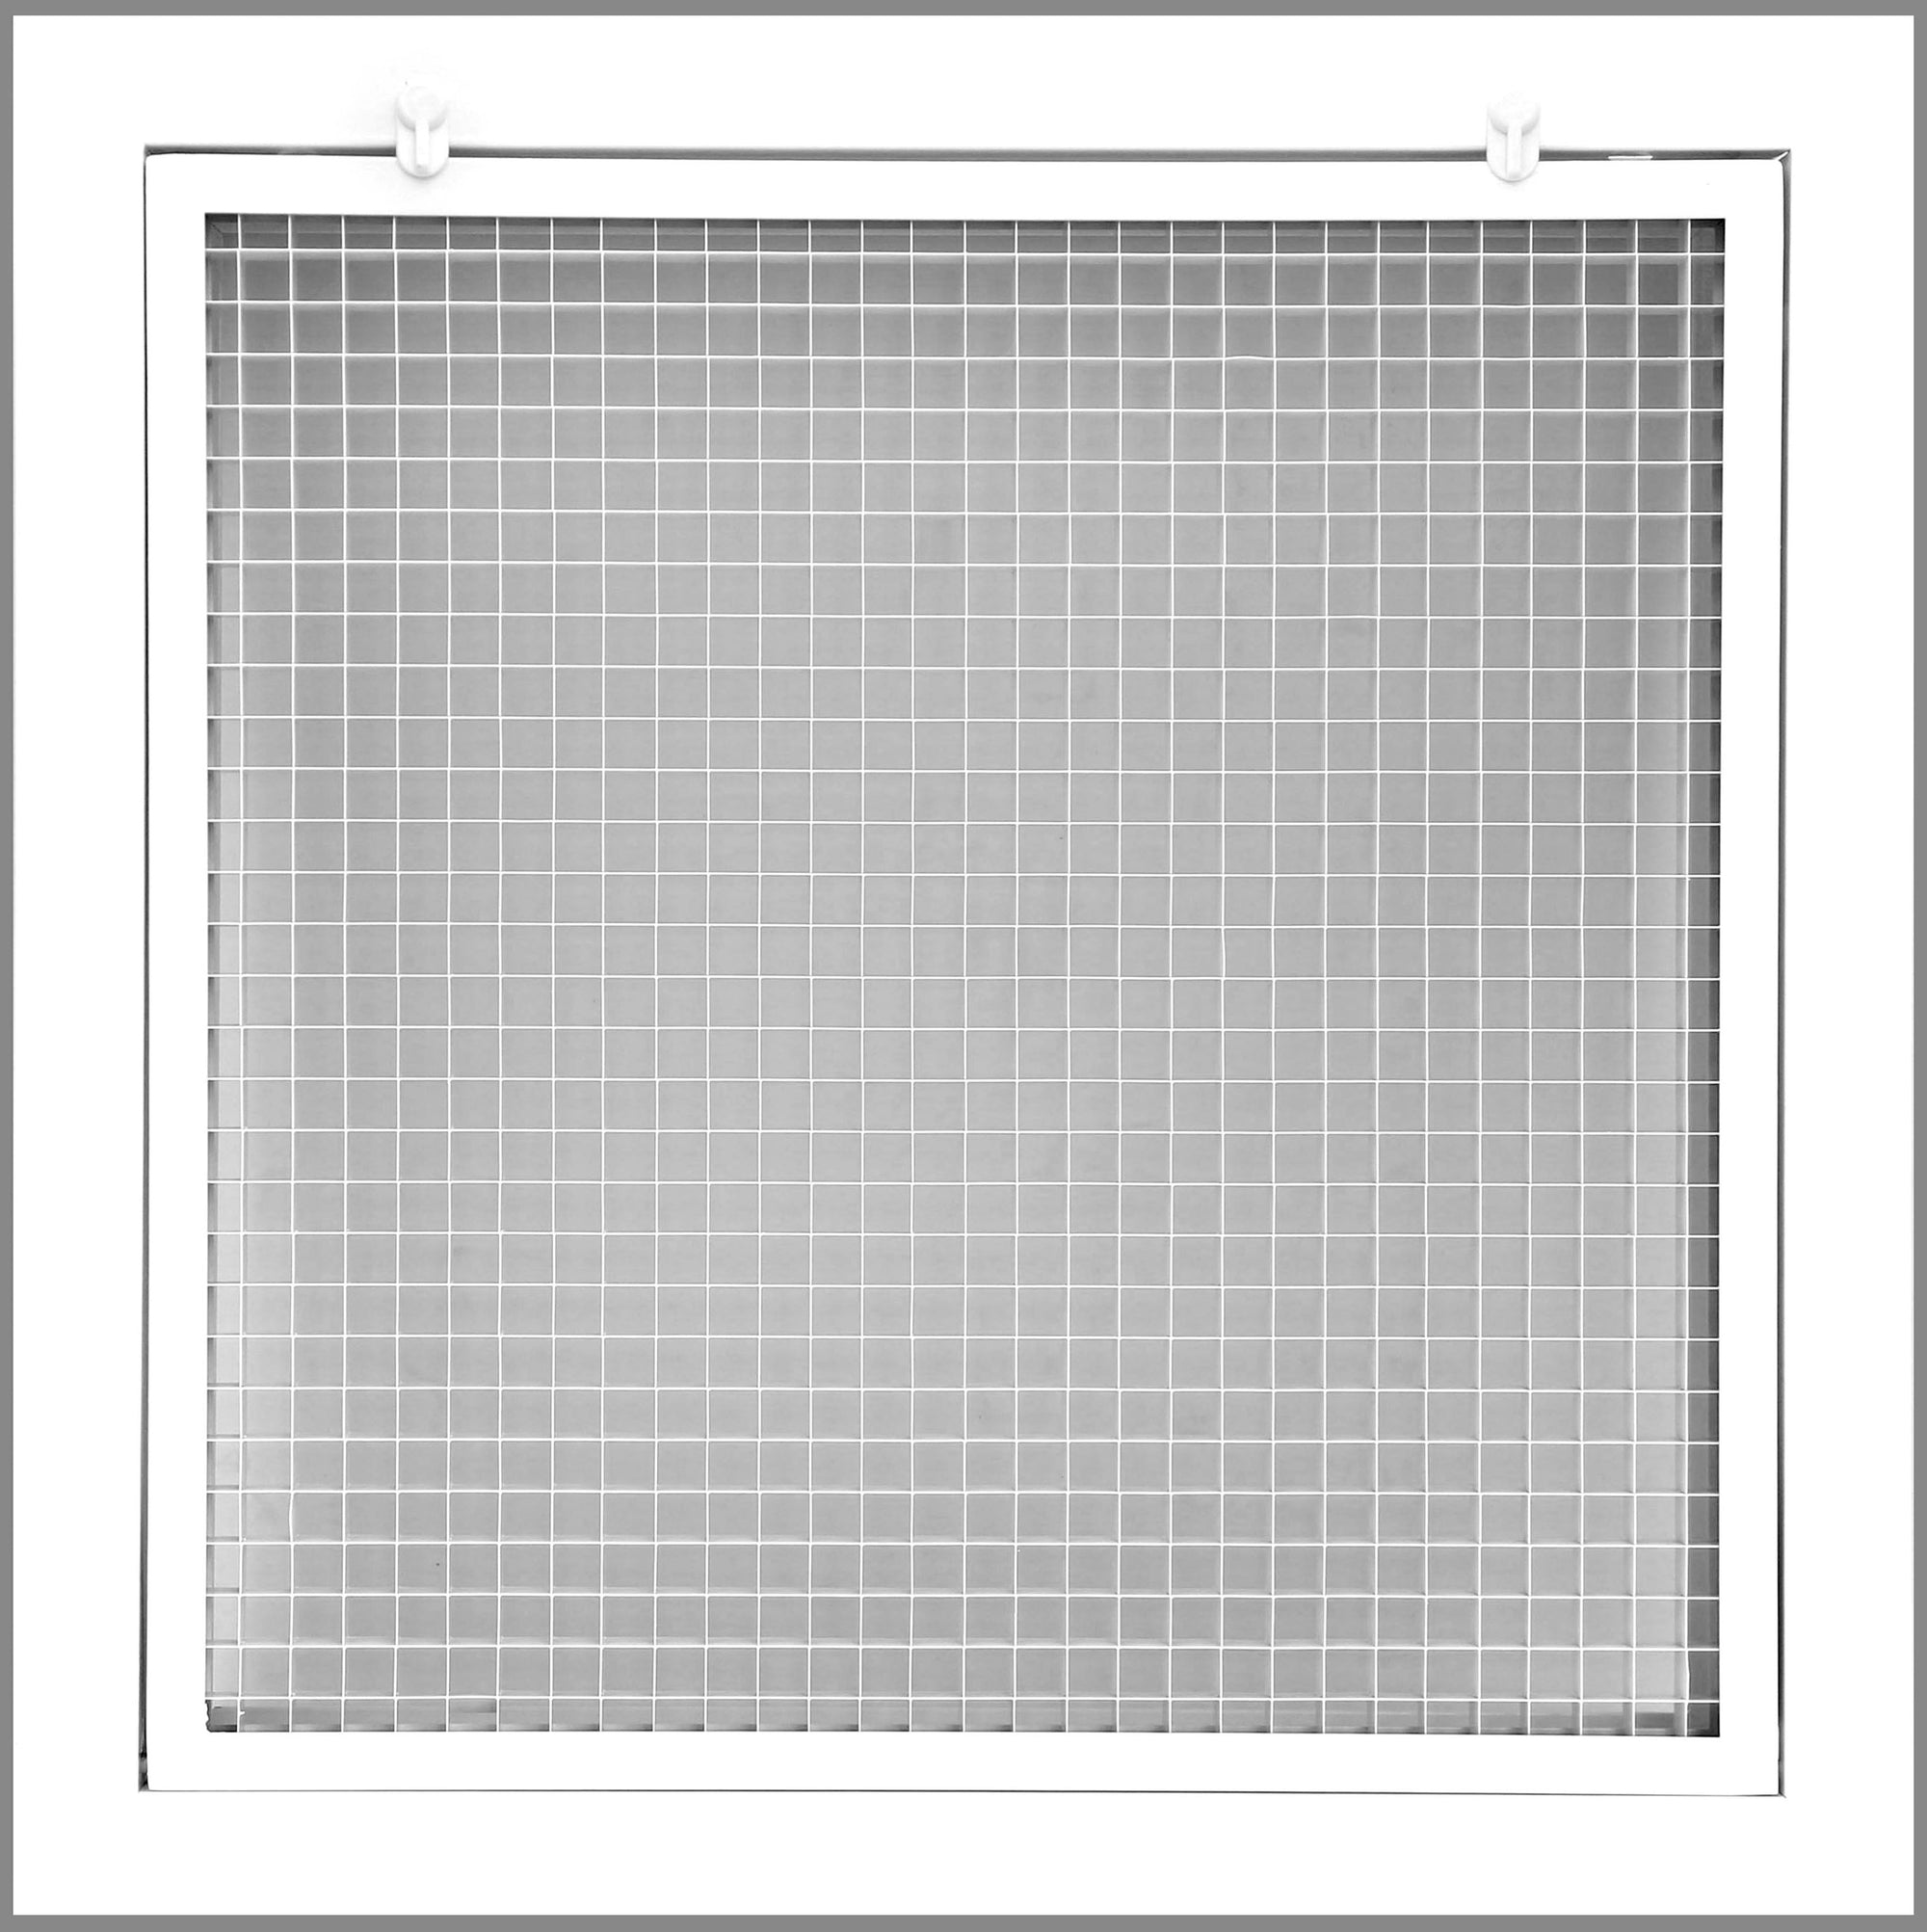 36" x 36" Cube Core Eggcrate Return Air Filter Grille for 1" Filter